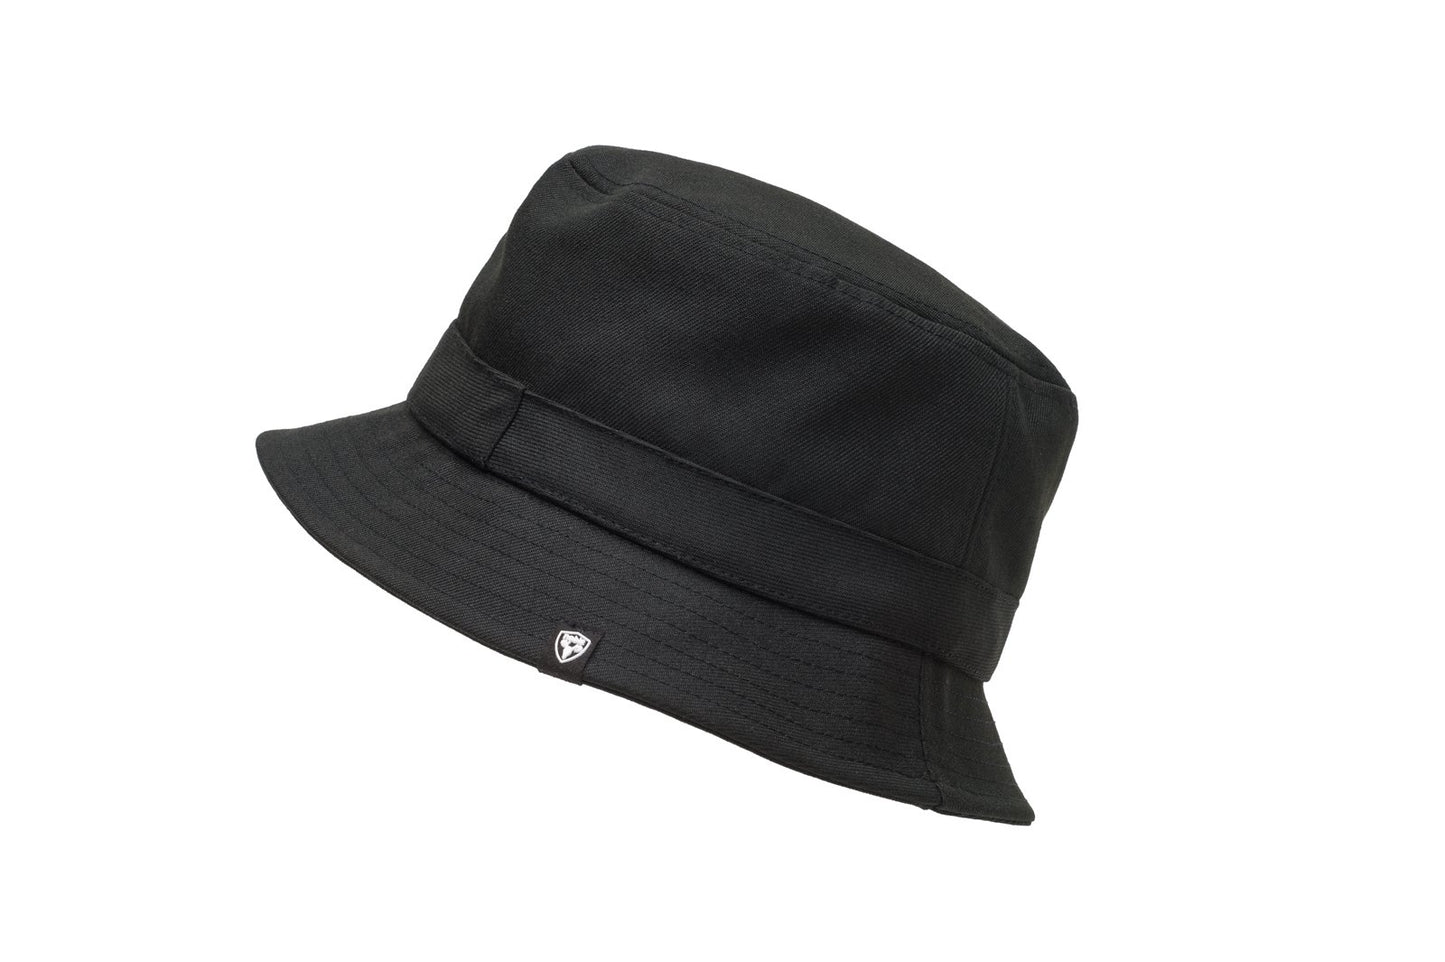 Unisex bucket hat with flat crown top and stitching detail on brim in Black